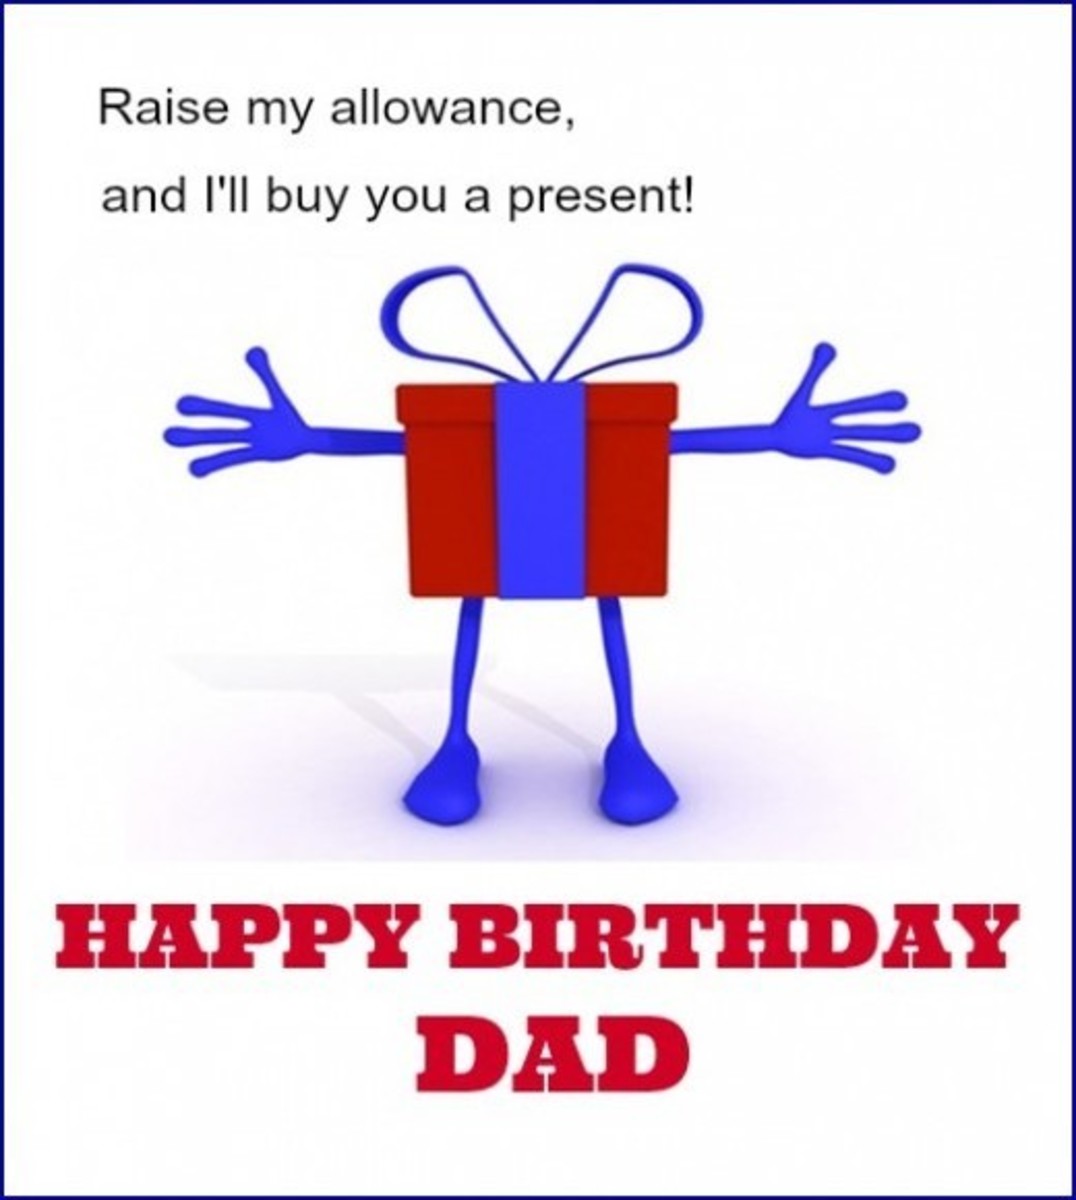 happy birthday dad free birthday greetings cards messages hubpages